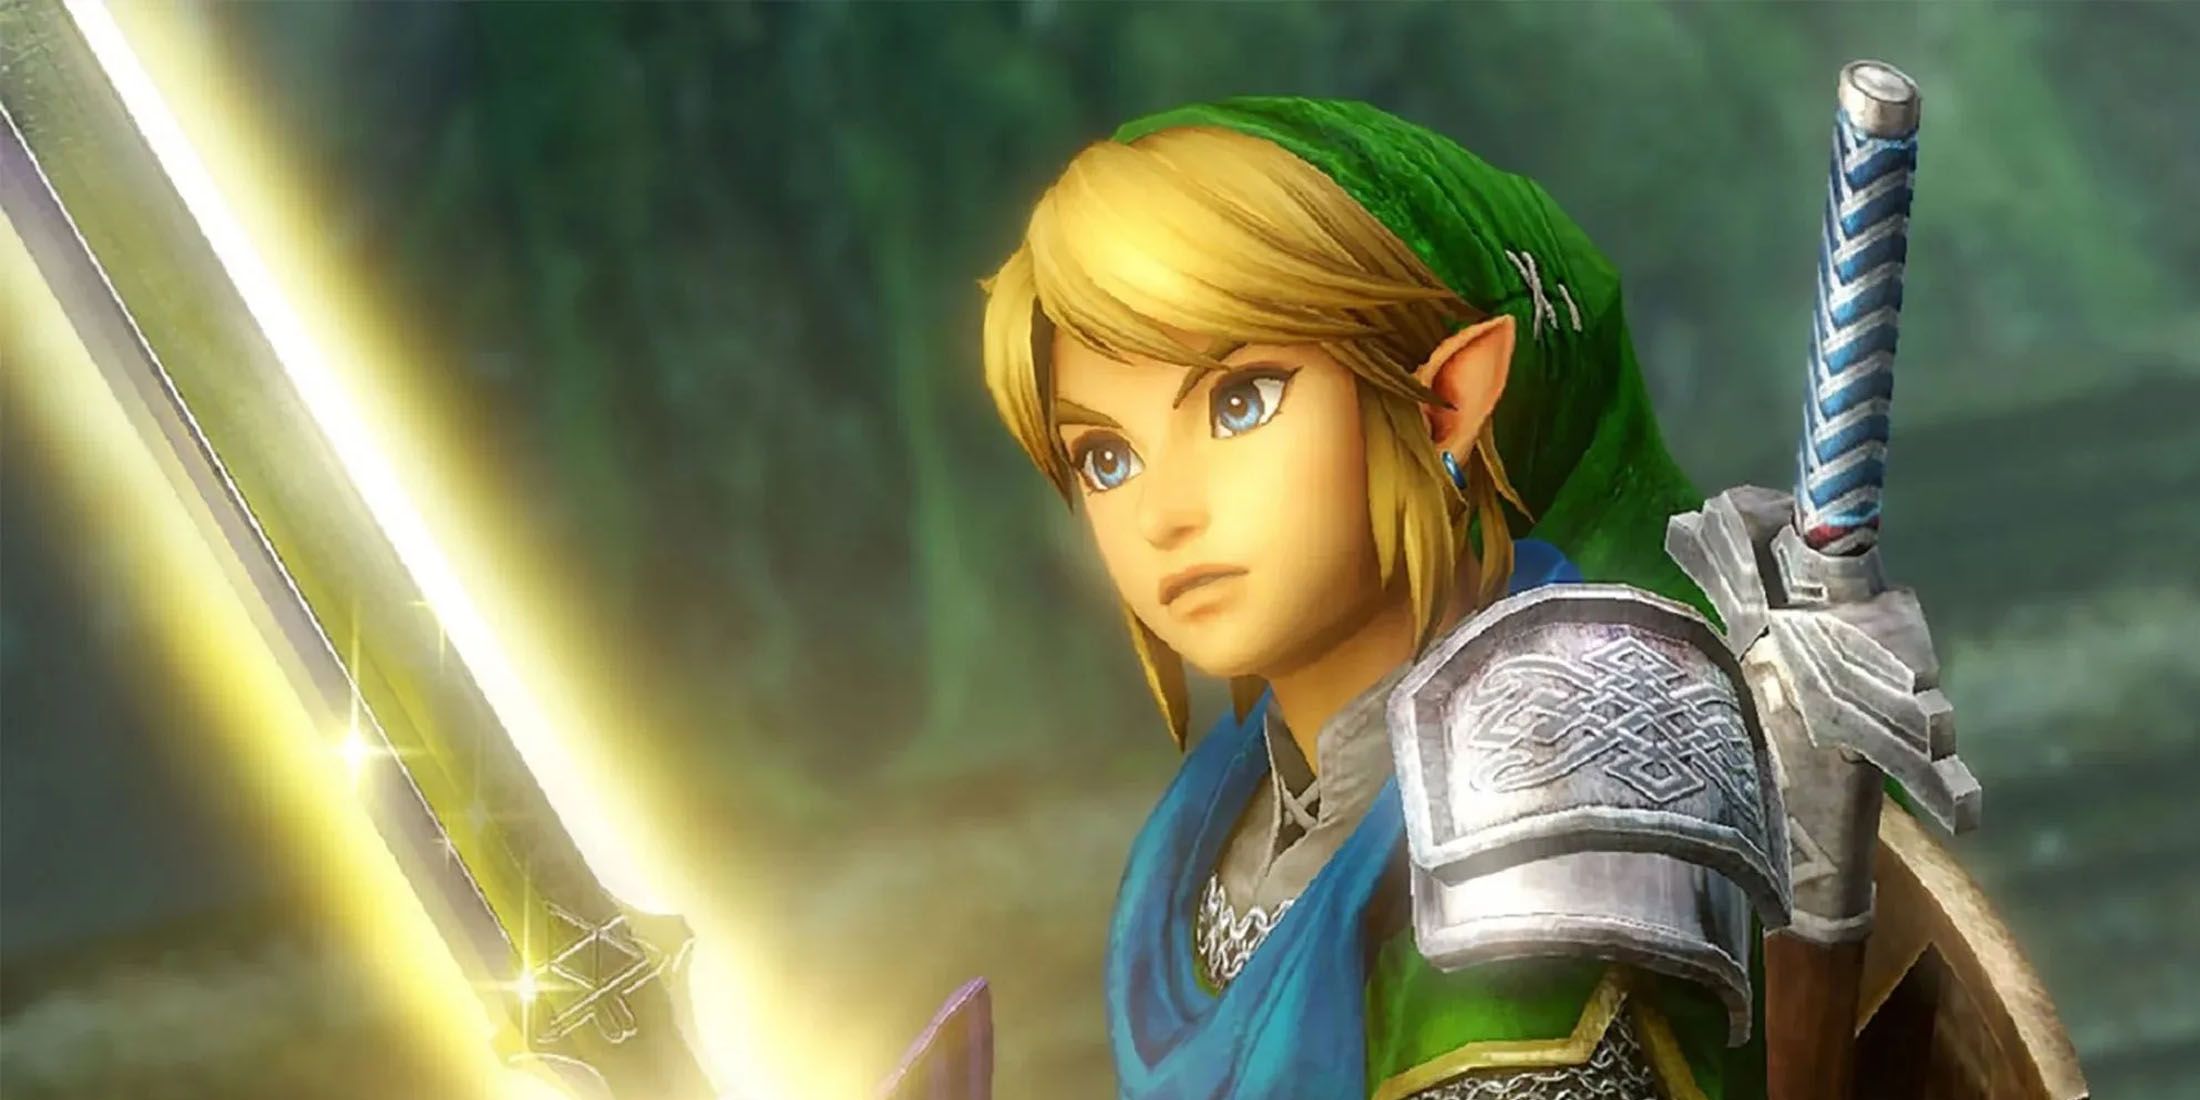 A screenshot of Link holding a glowing Master Sword in a forest in The Legend of Zelda.